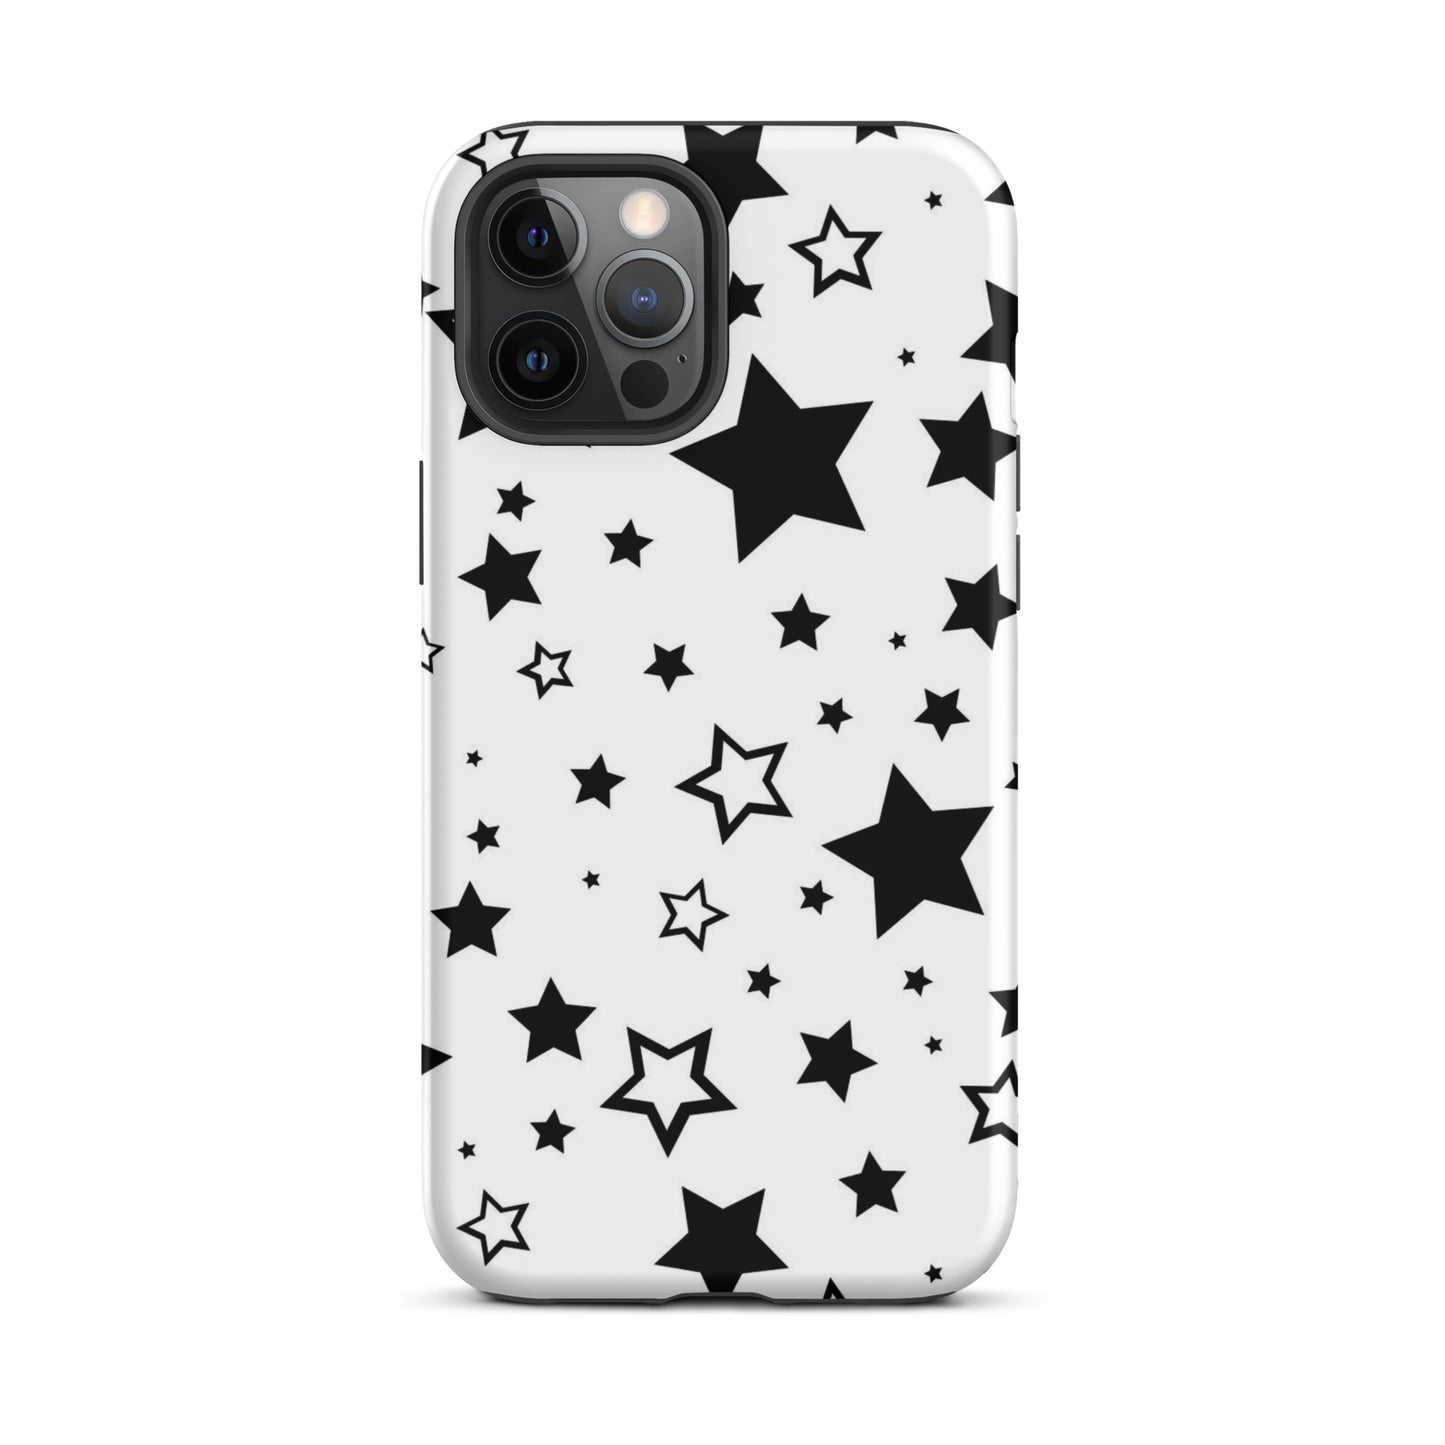 Star Girl iPhone Case iPhone 12 Pro Max Matte